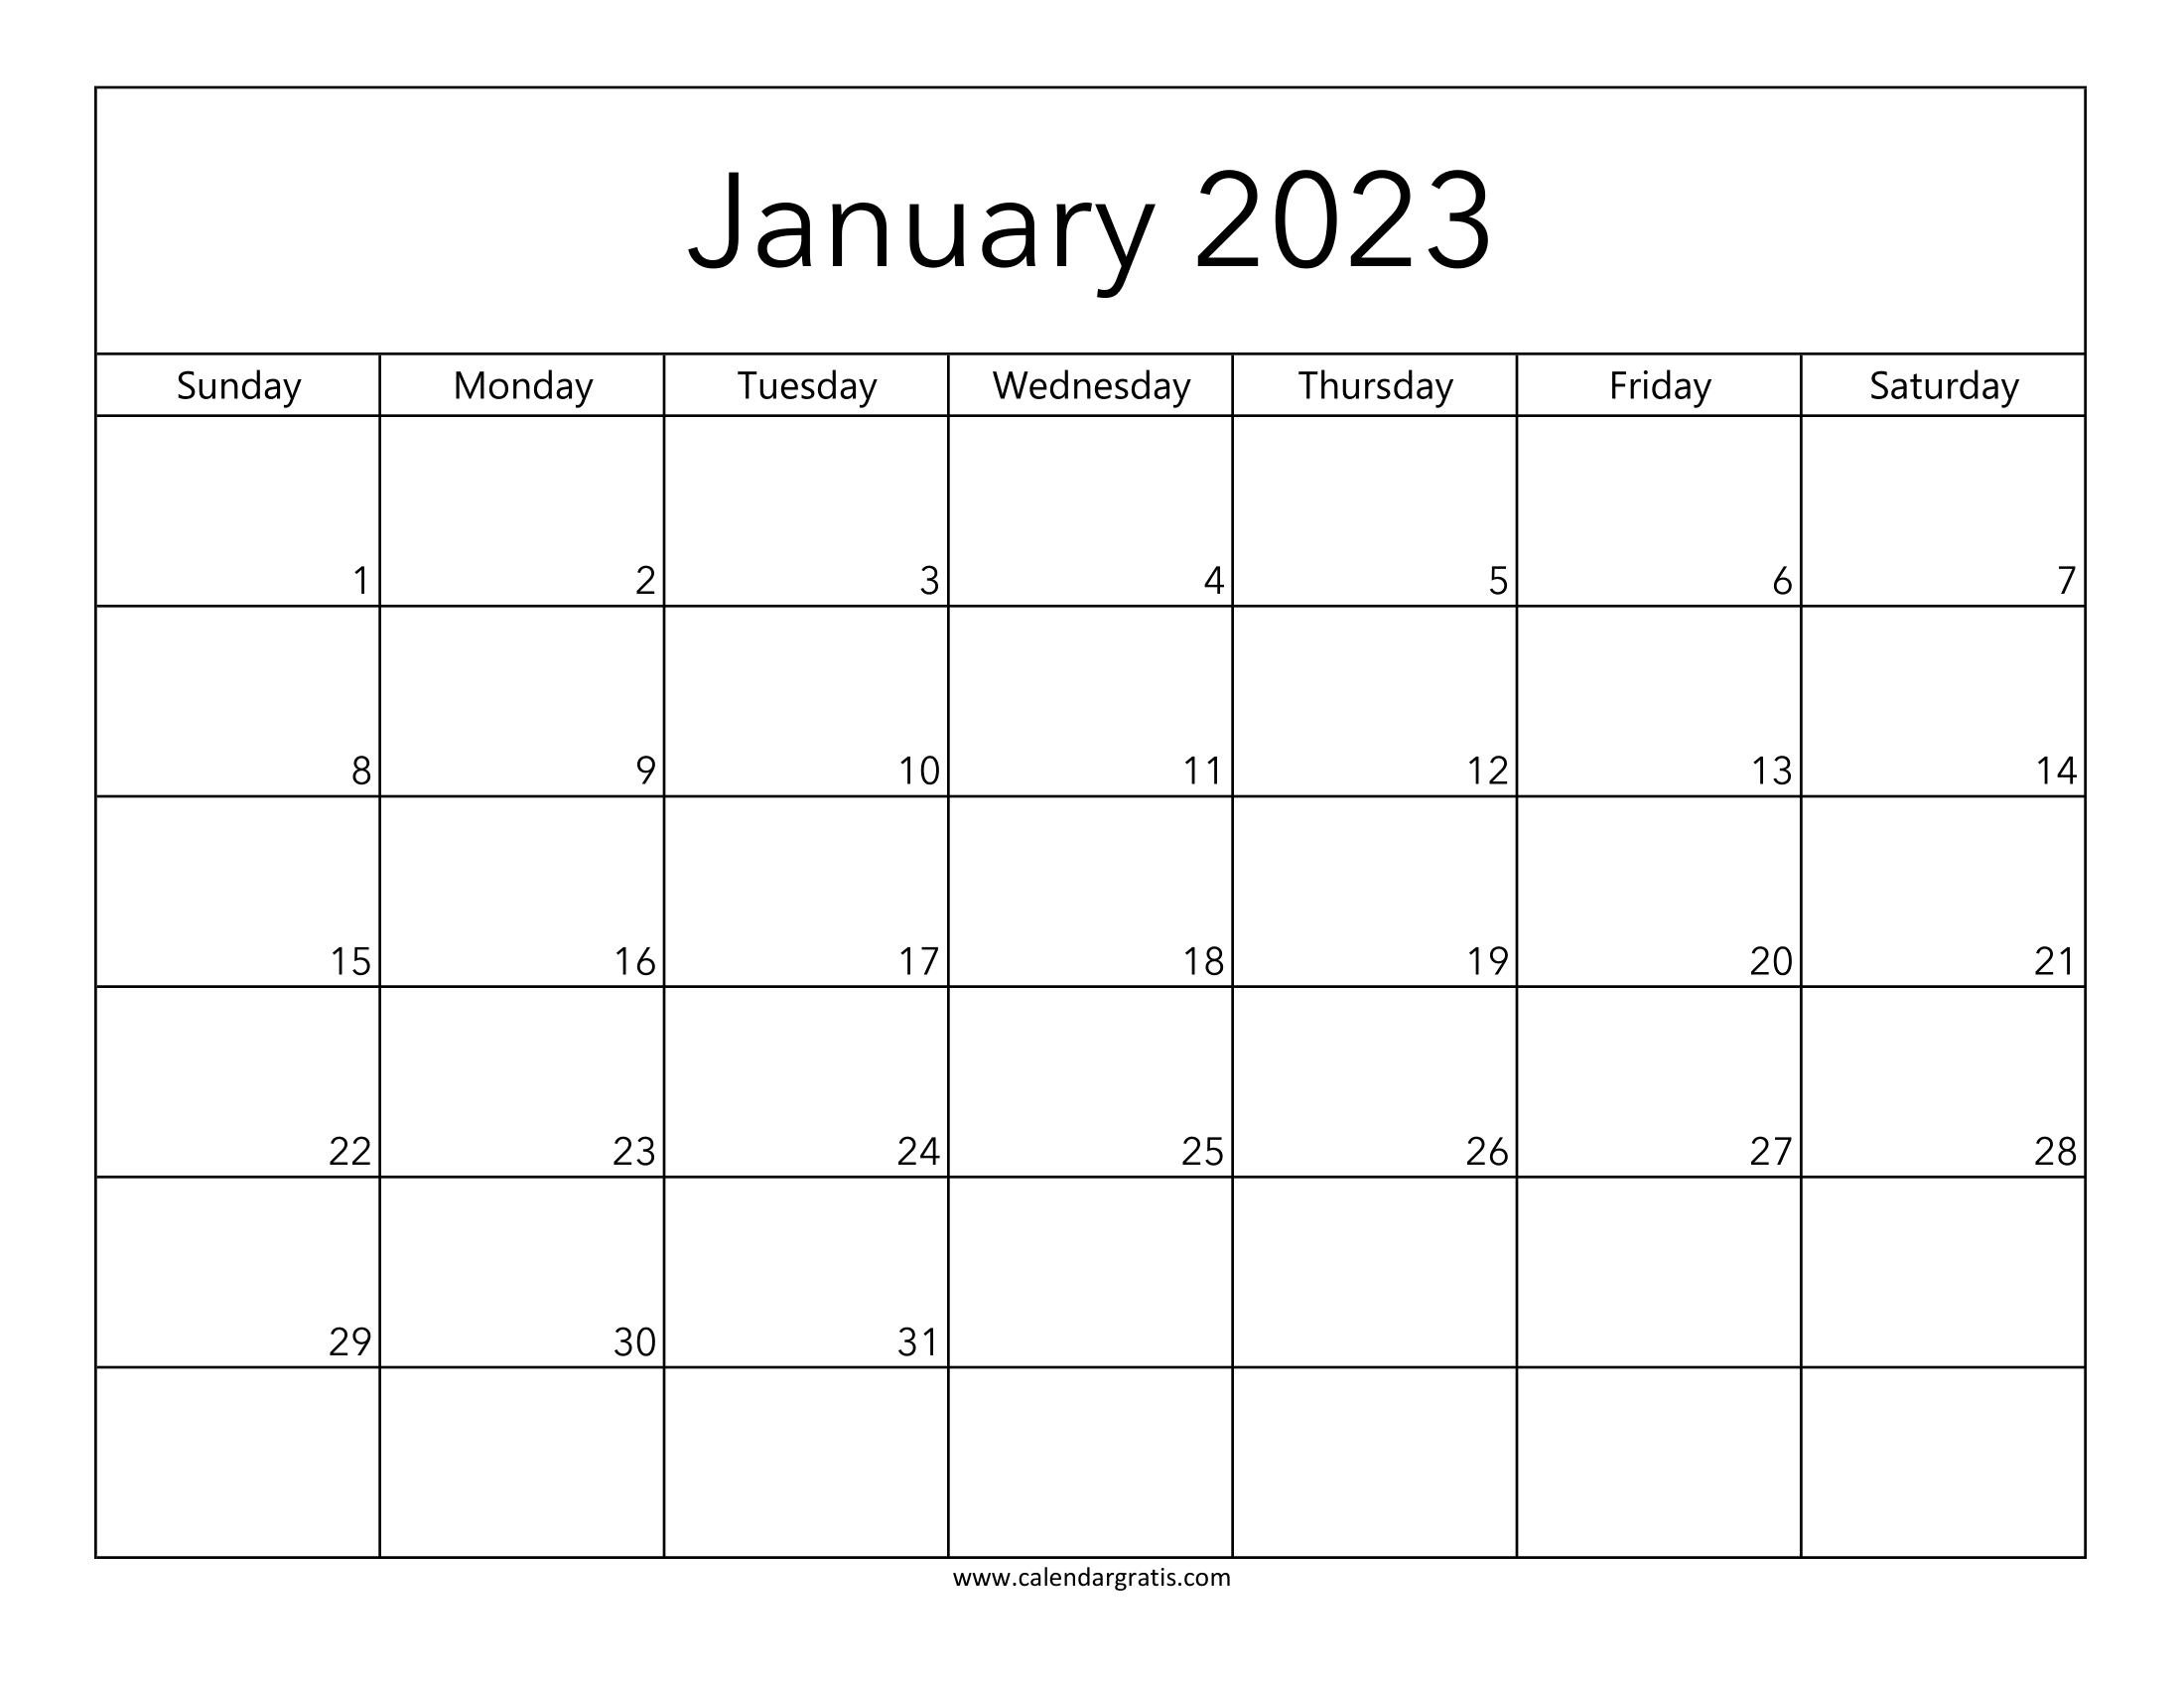 January 2023 Calendar Printable Free Template. Download the calendar and keep track of dates, day, and month.